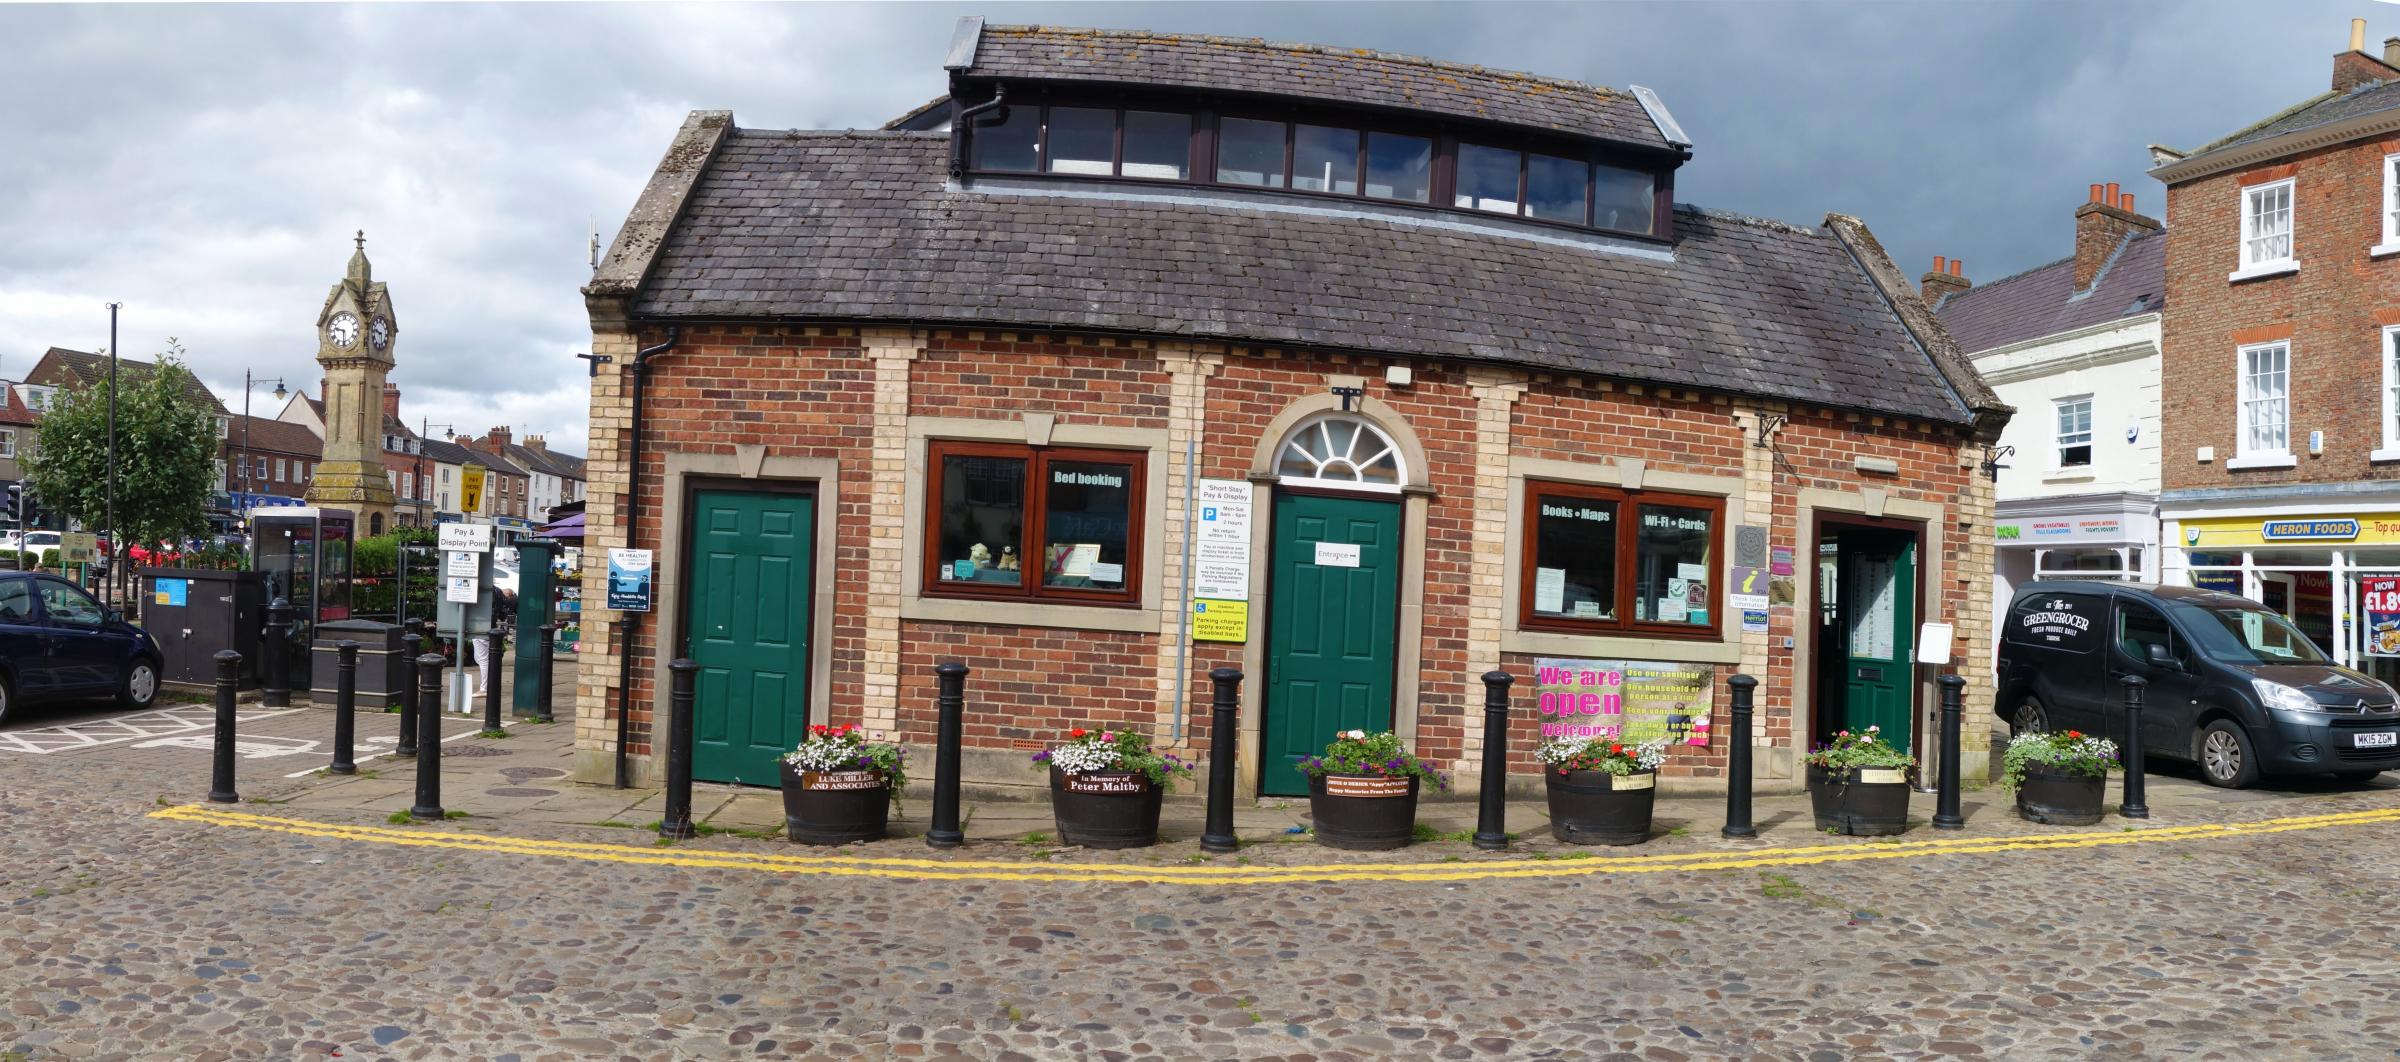 Award winning Thirsk tourism centre could be saved